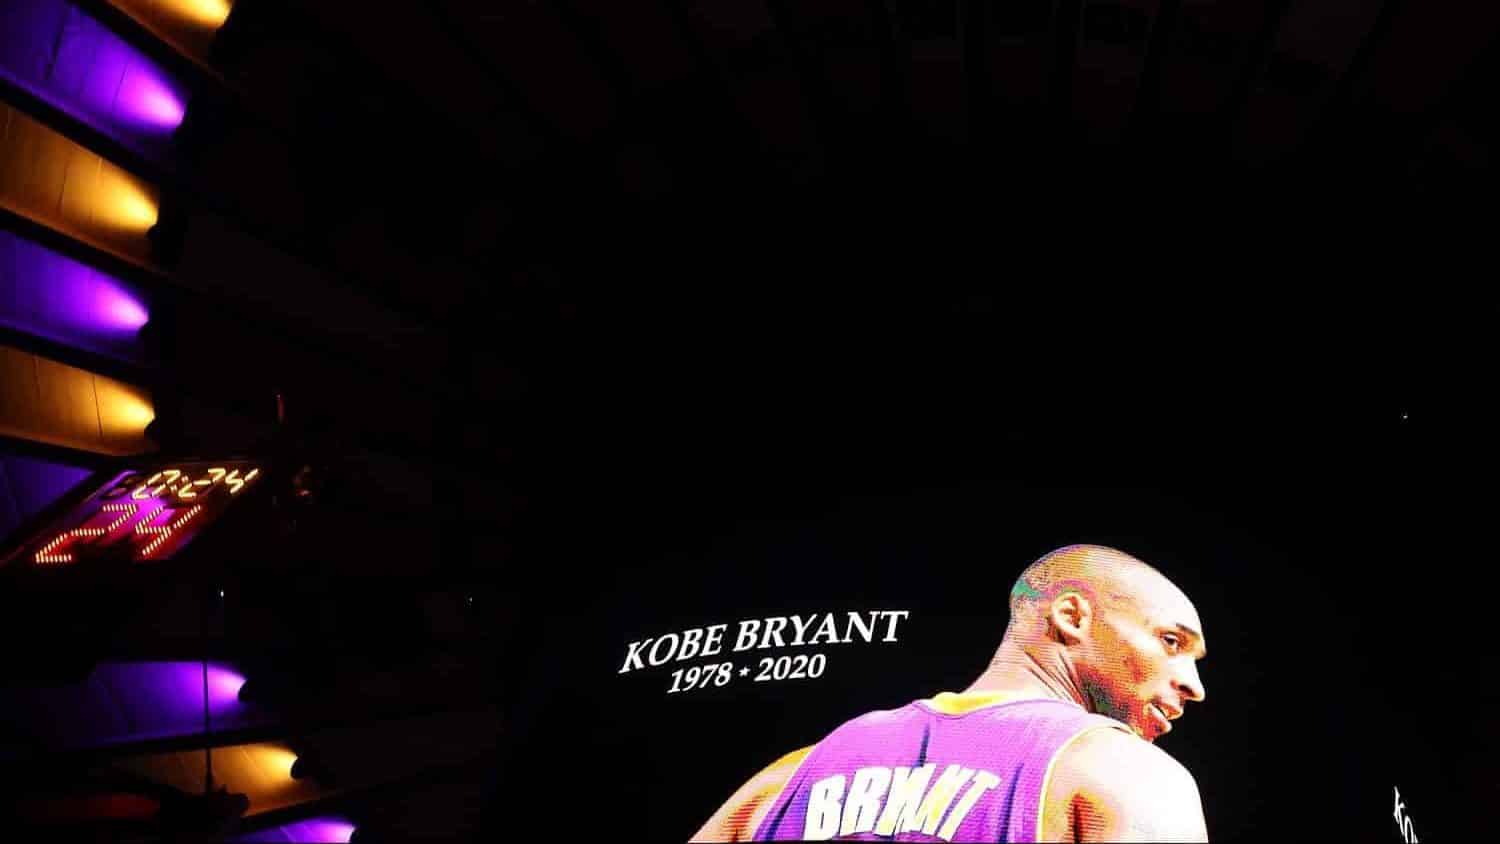 NEW YORK, NEW YORK - JANUARY 26: A moment of silence is held for former Los Angeles Laker great Kobe Bryant before the game between the New York Knicks and the Brooklyn Nets at Madison Square Garden on January 26, 2020 in New York City.Bryant died in a helicopter crash early this morning.NOTE TO USER: User expressly acknowledges and agrees that, by downloading and or using this photograph, User is consenting to the terms and conditions of the Getty Images License Agreement.